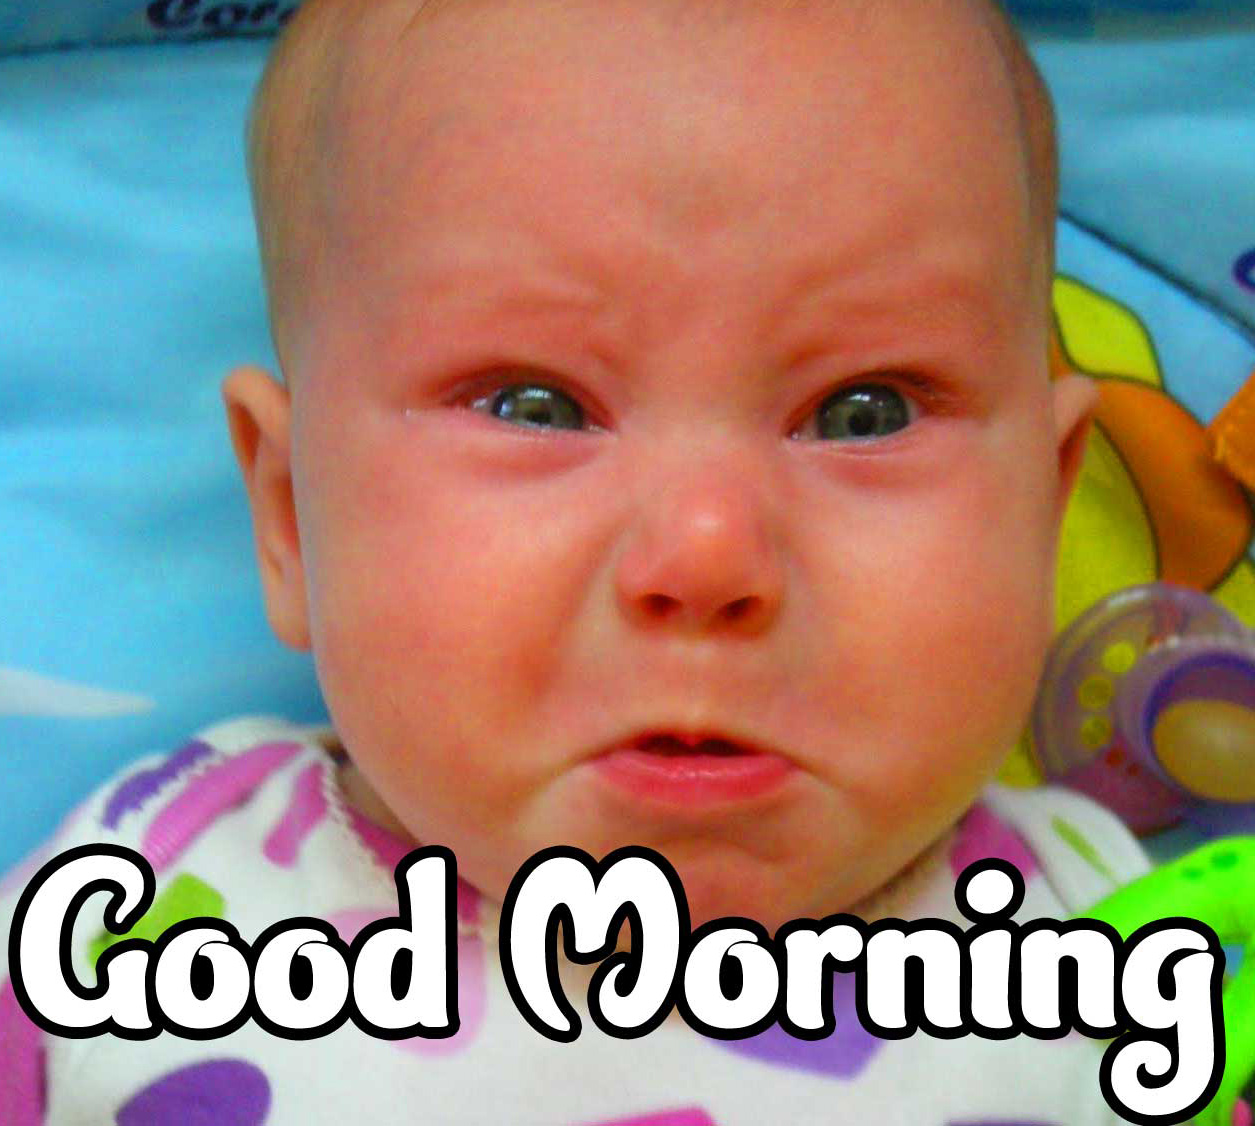 Good Morning Small Baby Images Wallpaper Free Download 